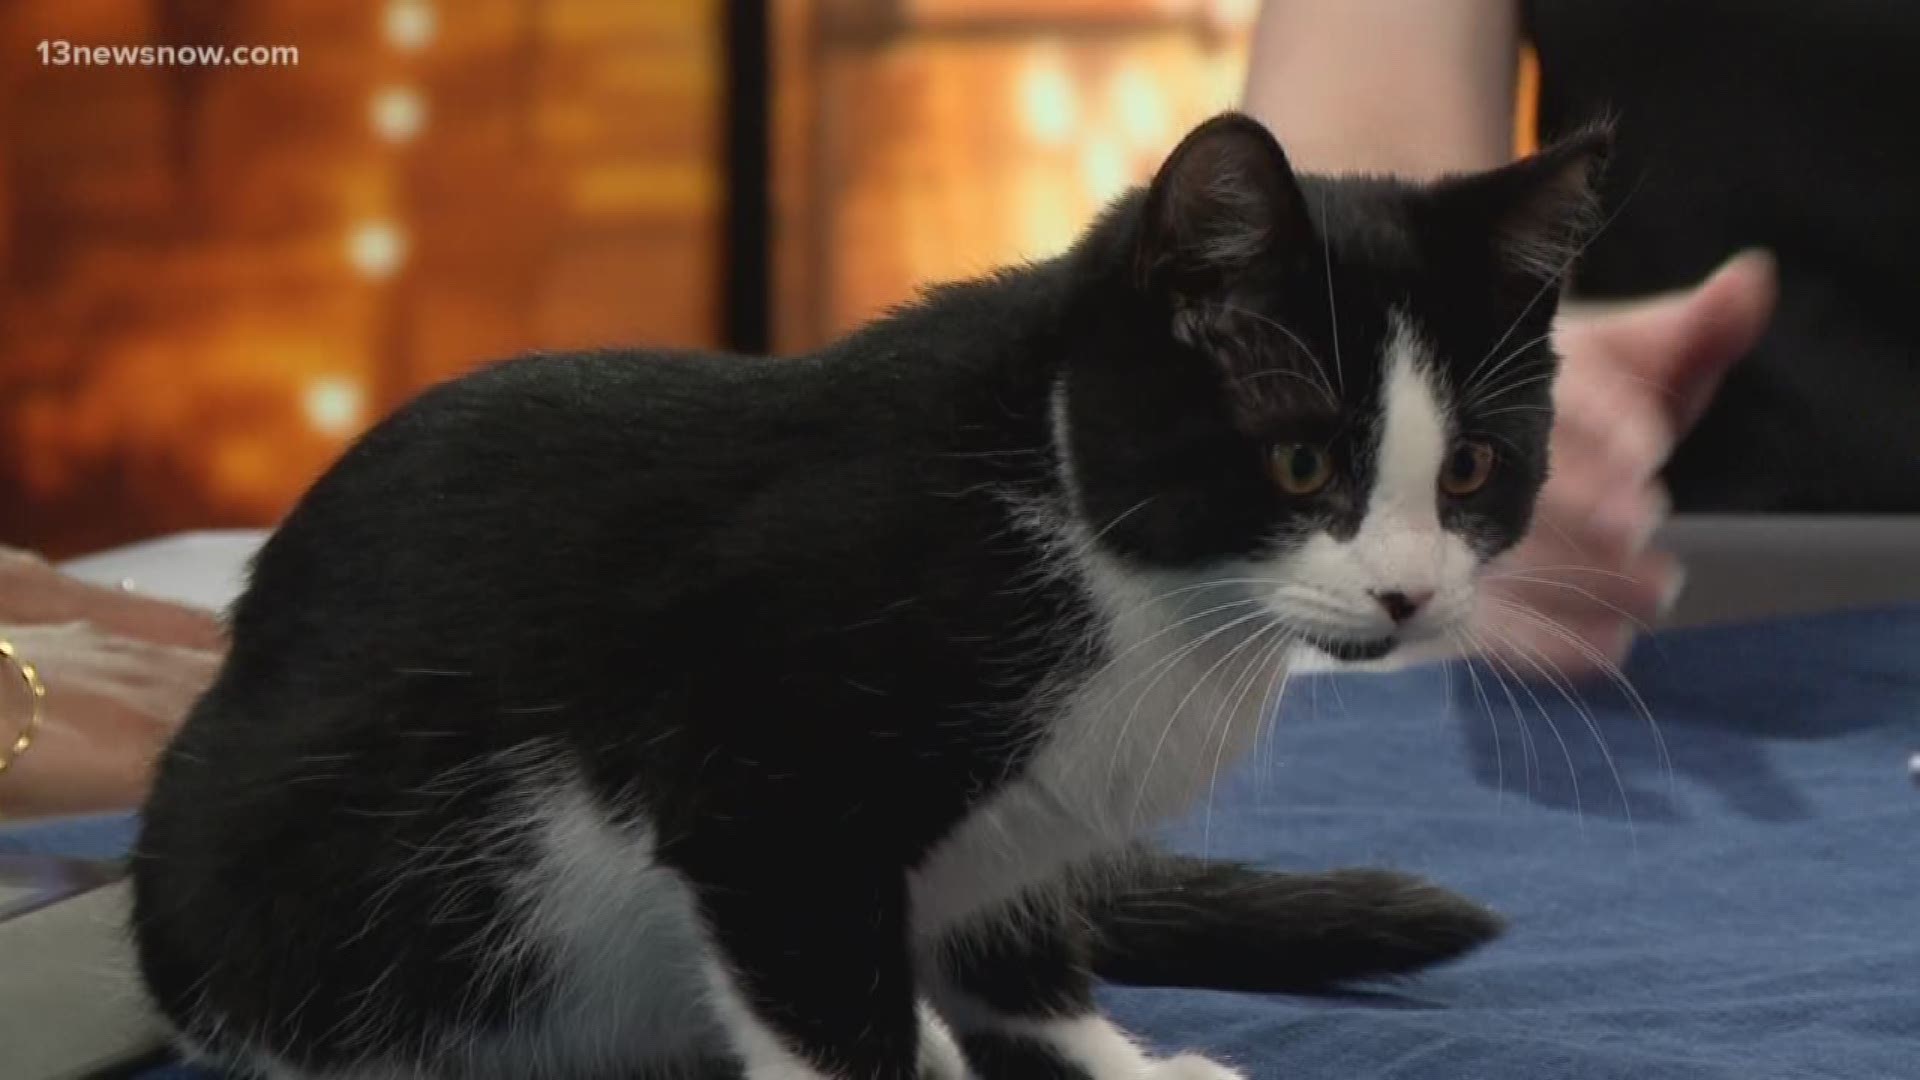 Meet Merlin from the Virginia Beach SPCA! The very outgoing 3 to 4-month-old kitten is up for adoption.